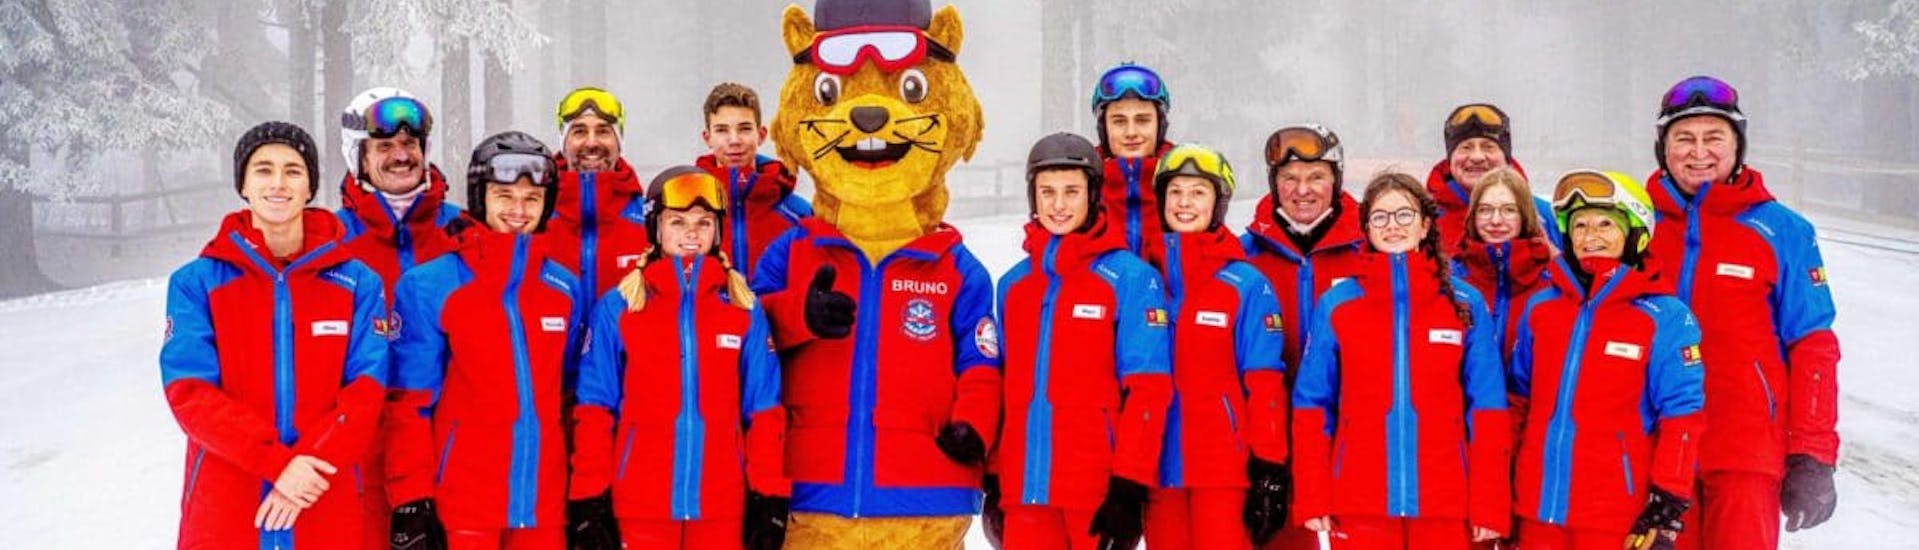 All ski instructors of the Sankt Englmar ski school take a photo with the mascot Bruno at the kids ski lessons (5-13 y.) for all levels.